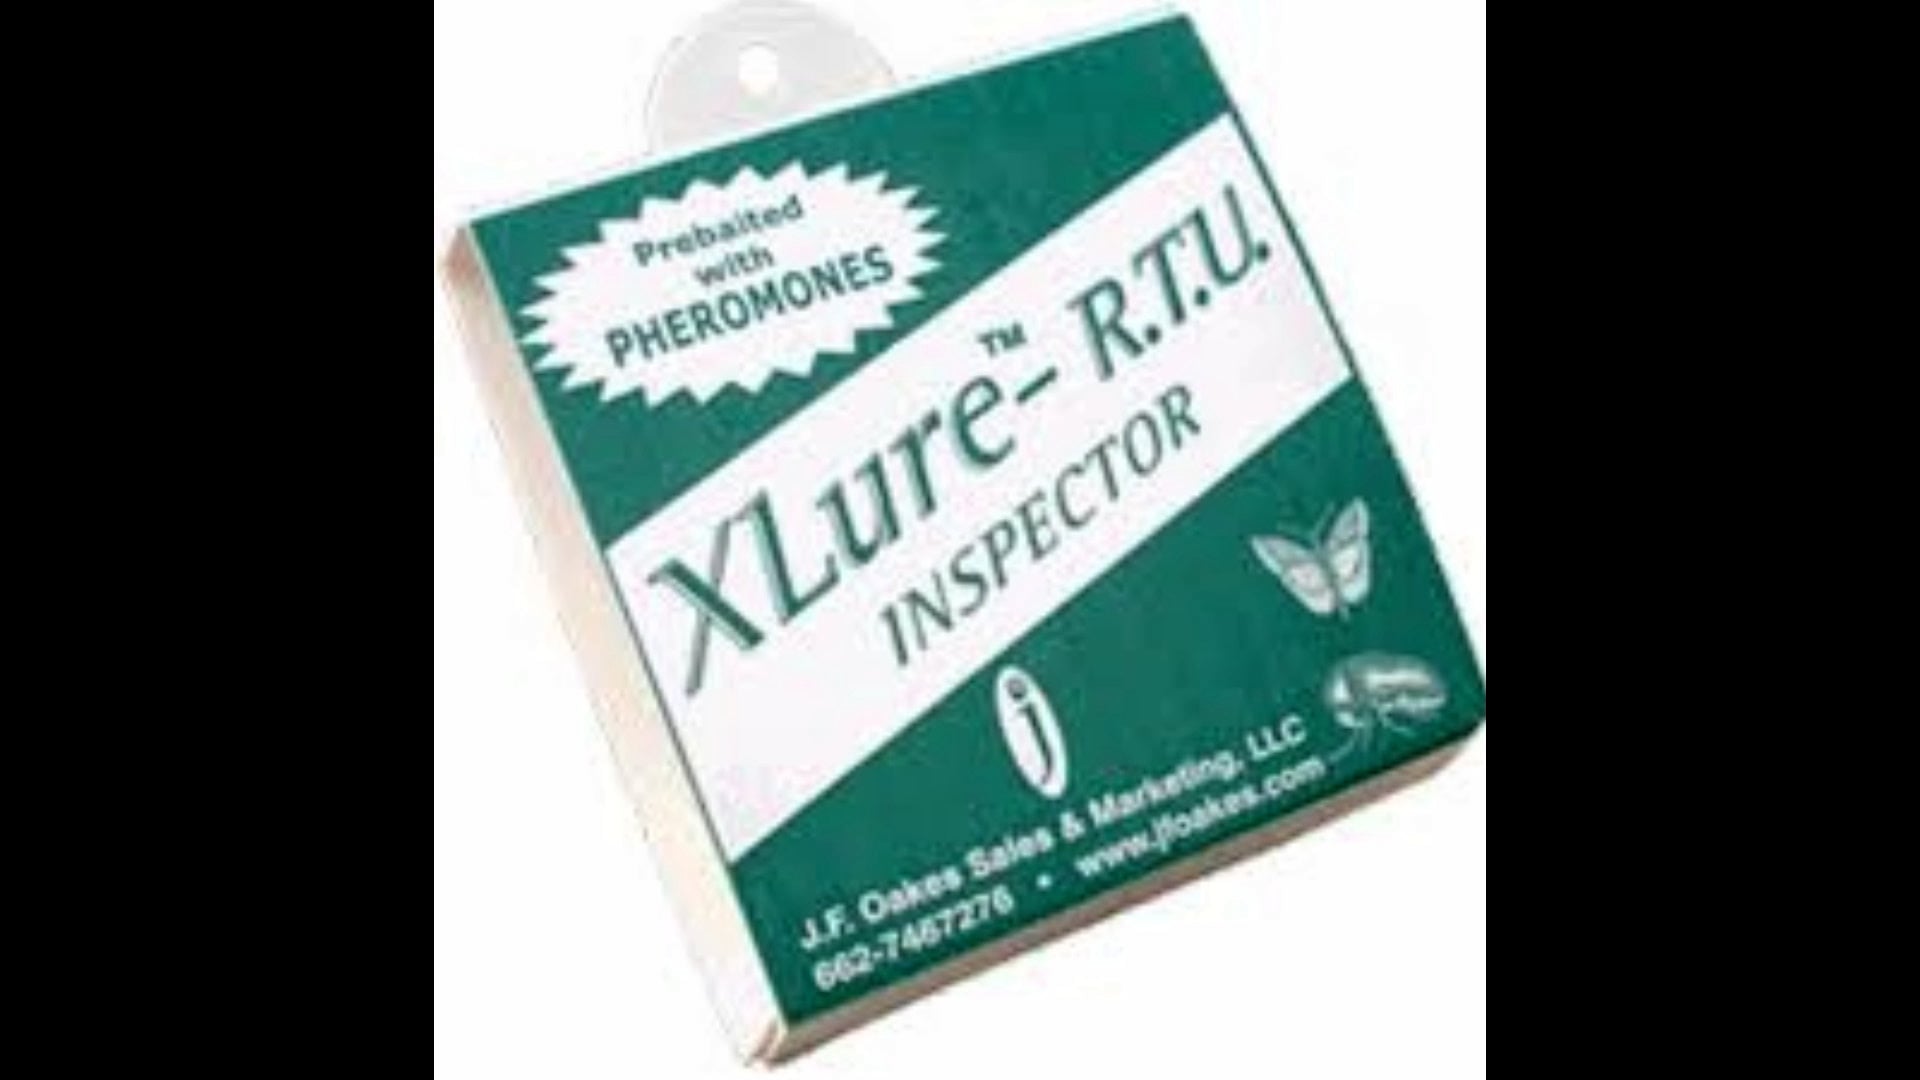 Xlure Inspector: use to economically pin-point stored product insect hot spots.